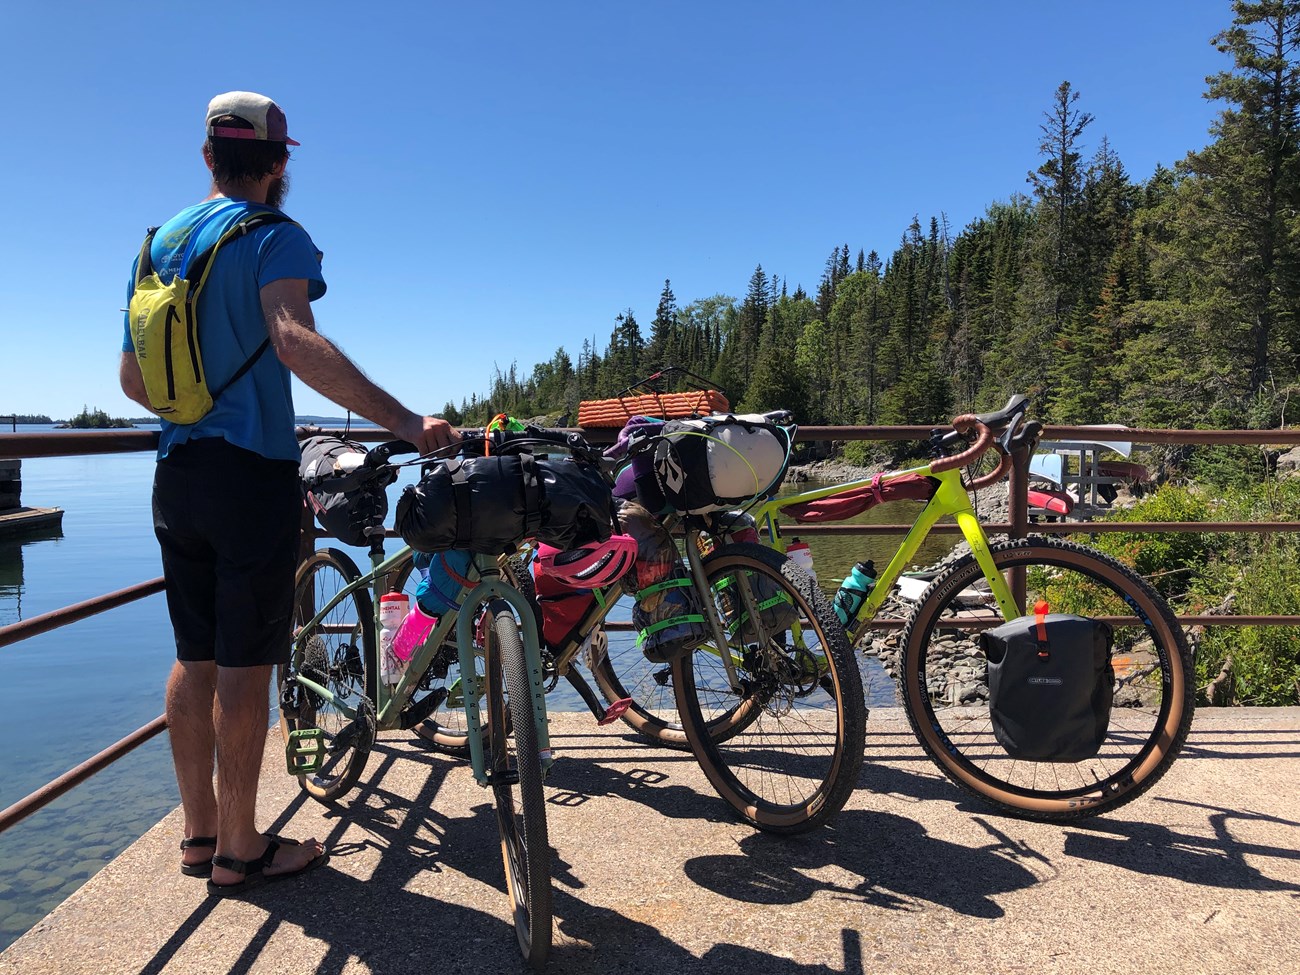 A person stands next to three bicycles loaded with gear while looking out to Lake Superior.